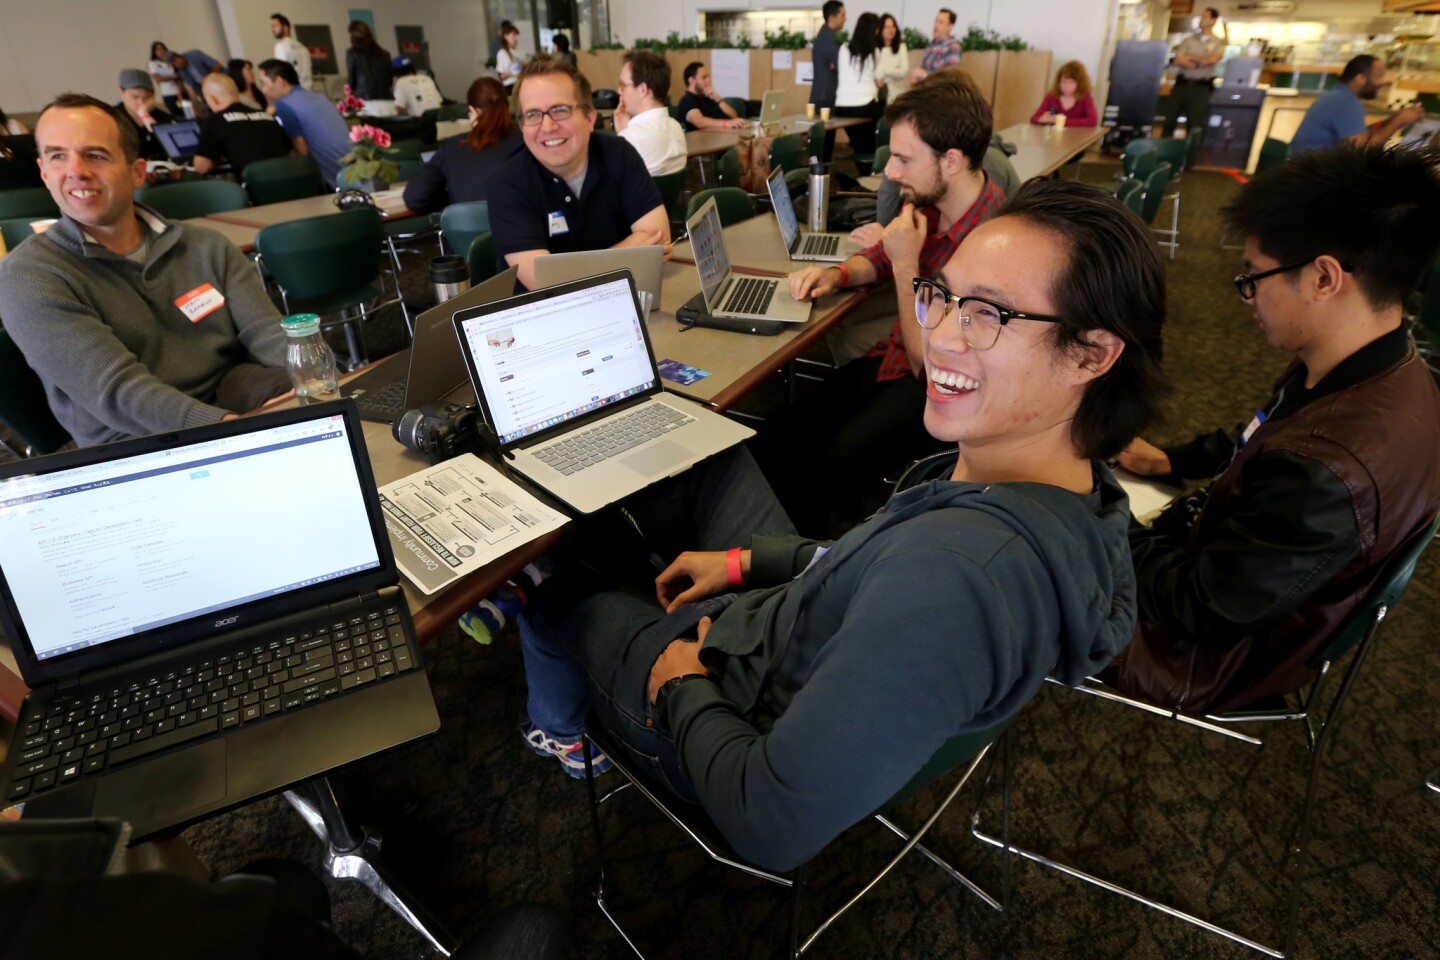 A group at L.A.'s "hackathon" share a light moment while brainstorming on Day 1 of the two-day event, which aims to use the skills of the technology sector to develop tools to improve residents' lives.